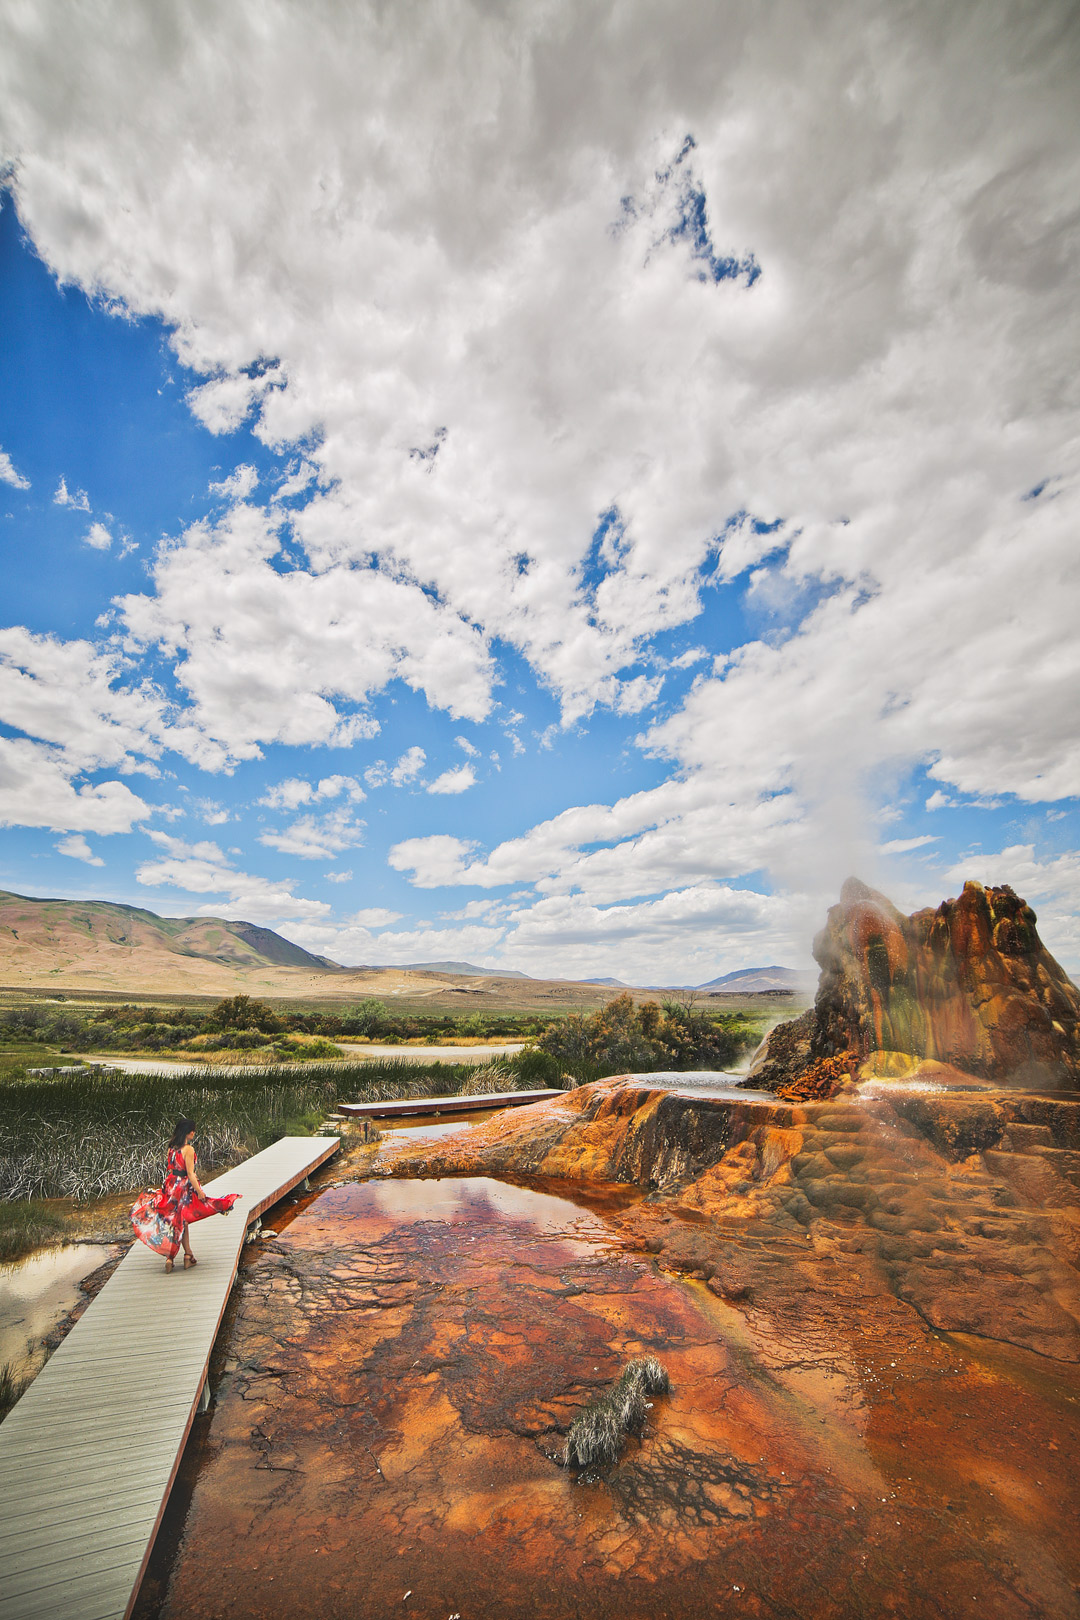 Fly Geyser Nevada - What You Need to Know Before You Go